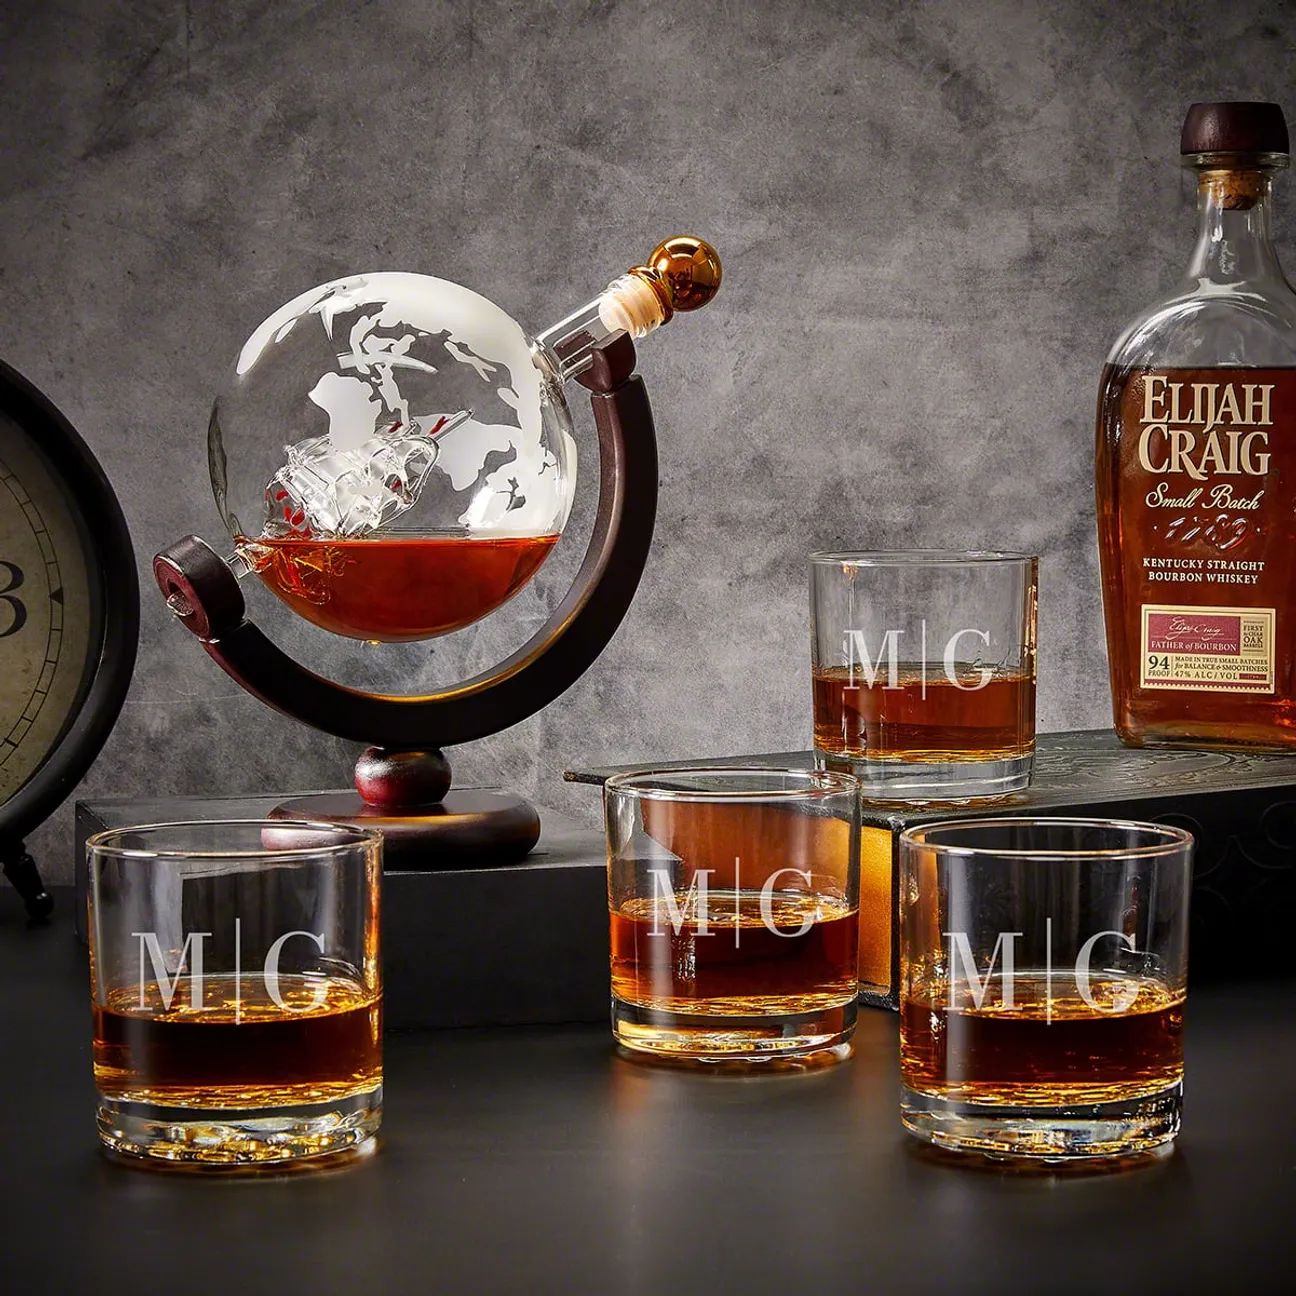 Monogrammed Whiskey Globe Decanter Set with Rocks Glasses - 5pc Quinton | HomeWetBar.com